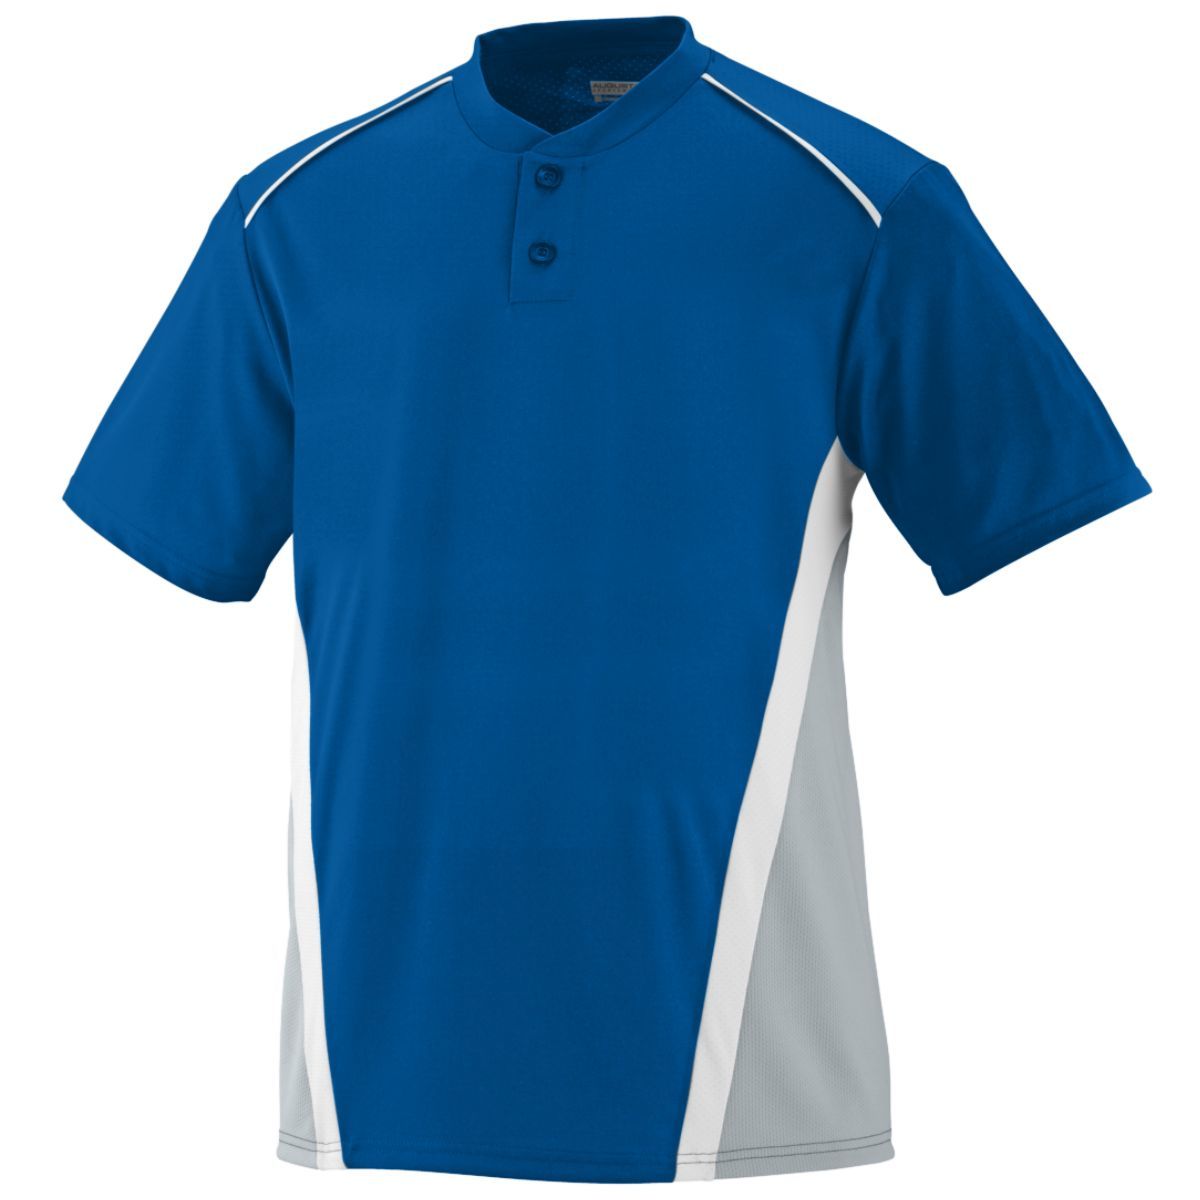 Augusta Sportswear Rbi Jersey in Royal/Silver Grey/White  -Part of the Adult, Adult-Jersey, Augusta-Products, Softball, Shirts product lines at KanaleyCreations.com